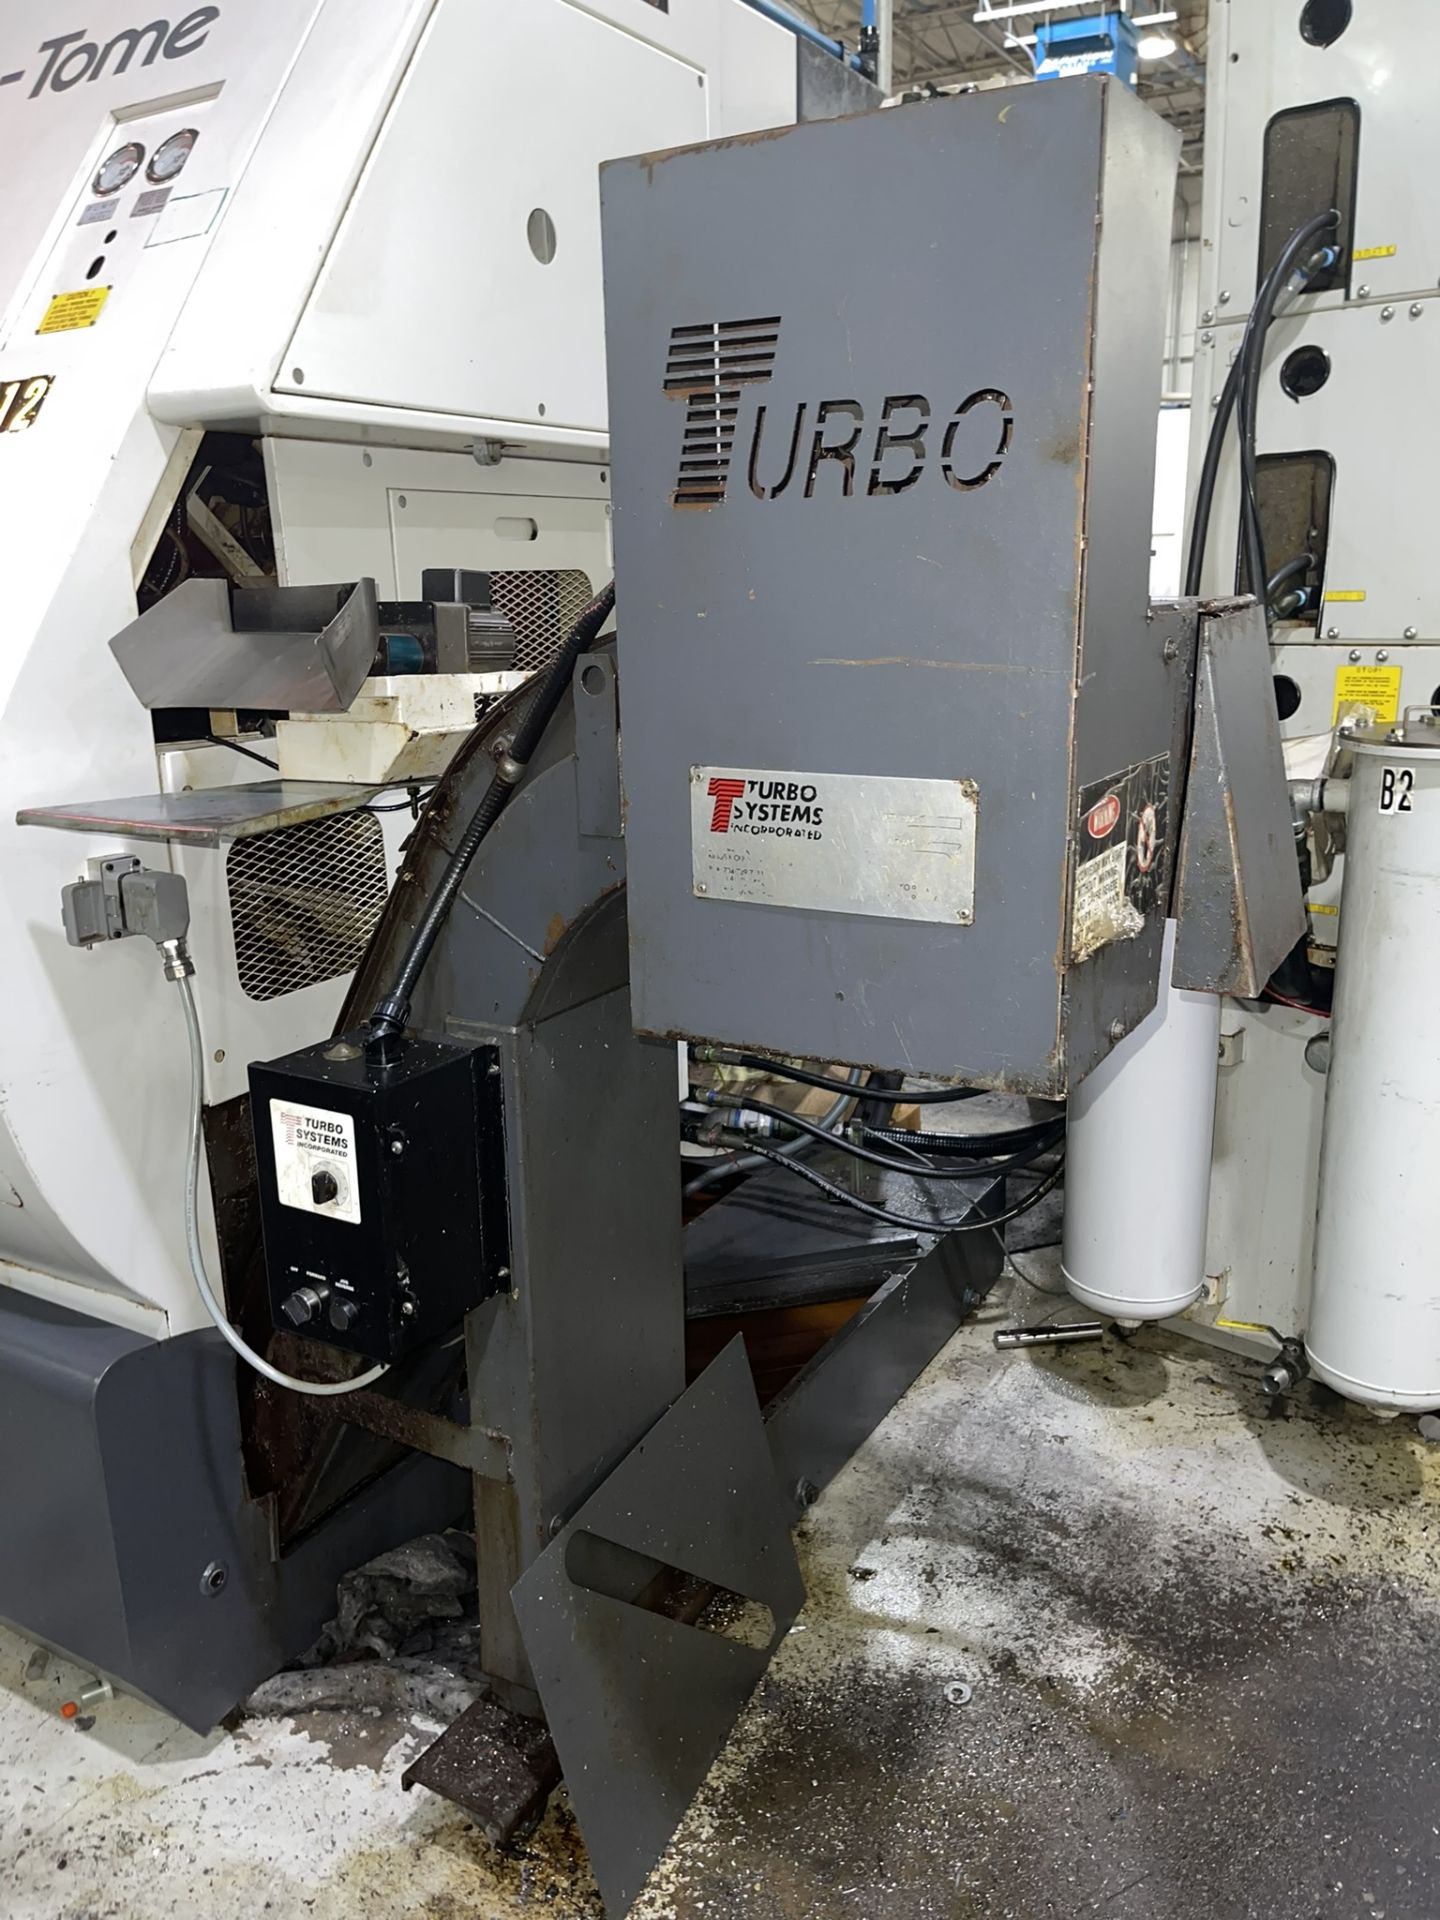 2007 Nakamura Tome WT-300 8-Axis CNC Turning/Milling Center, S/N M300909 - Image 12 of 19